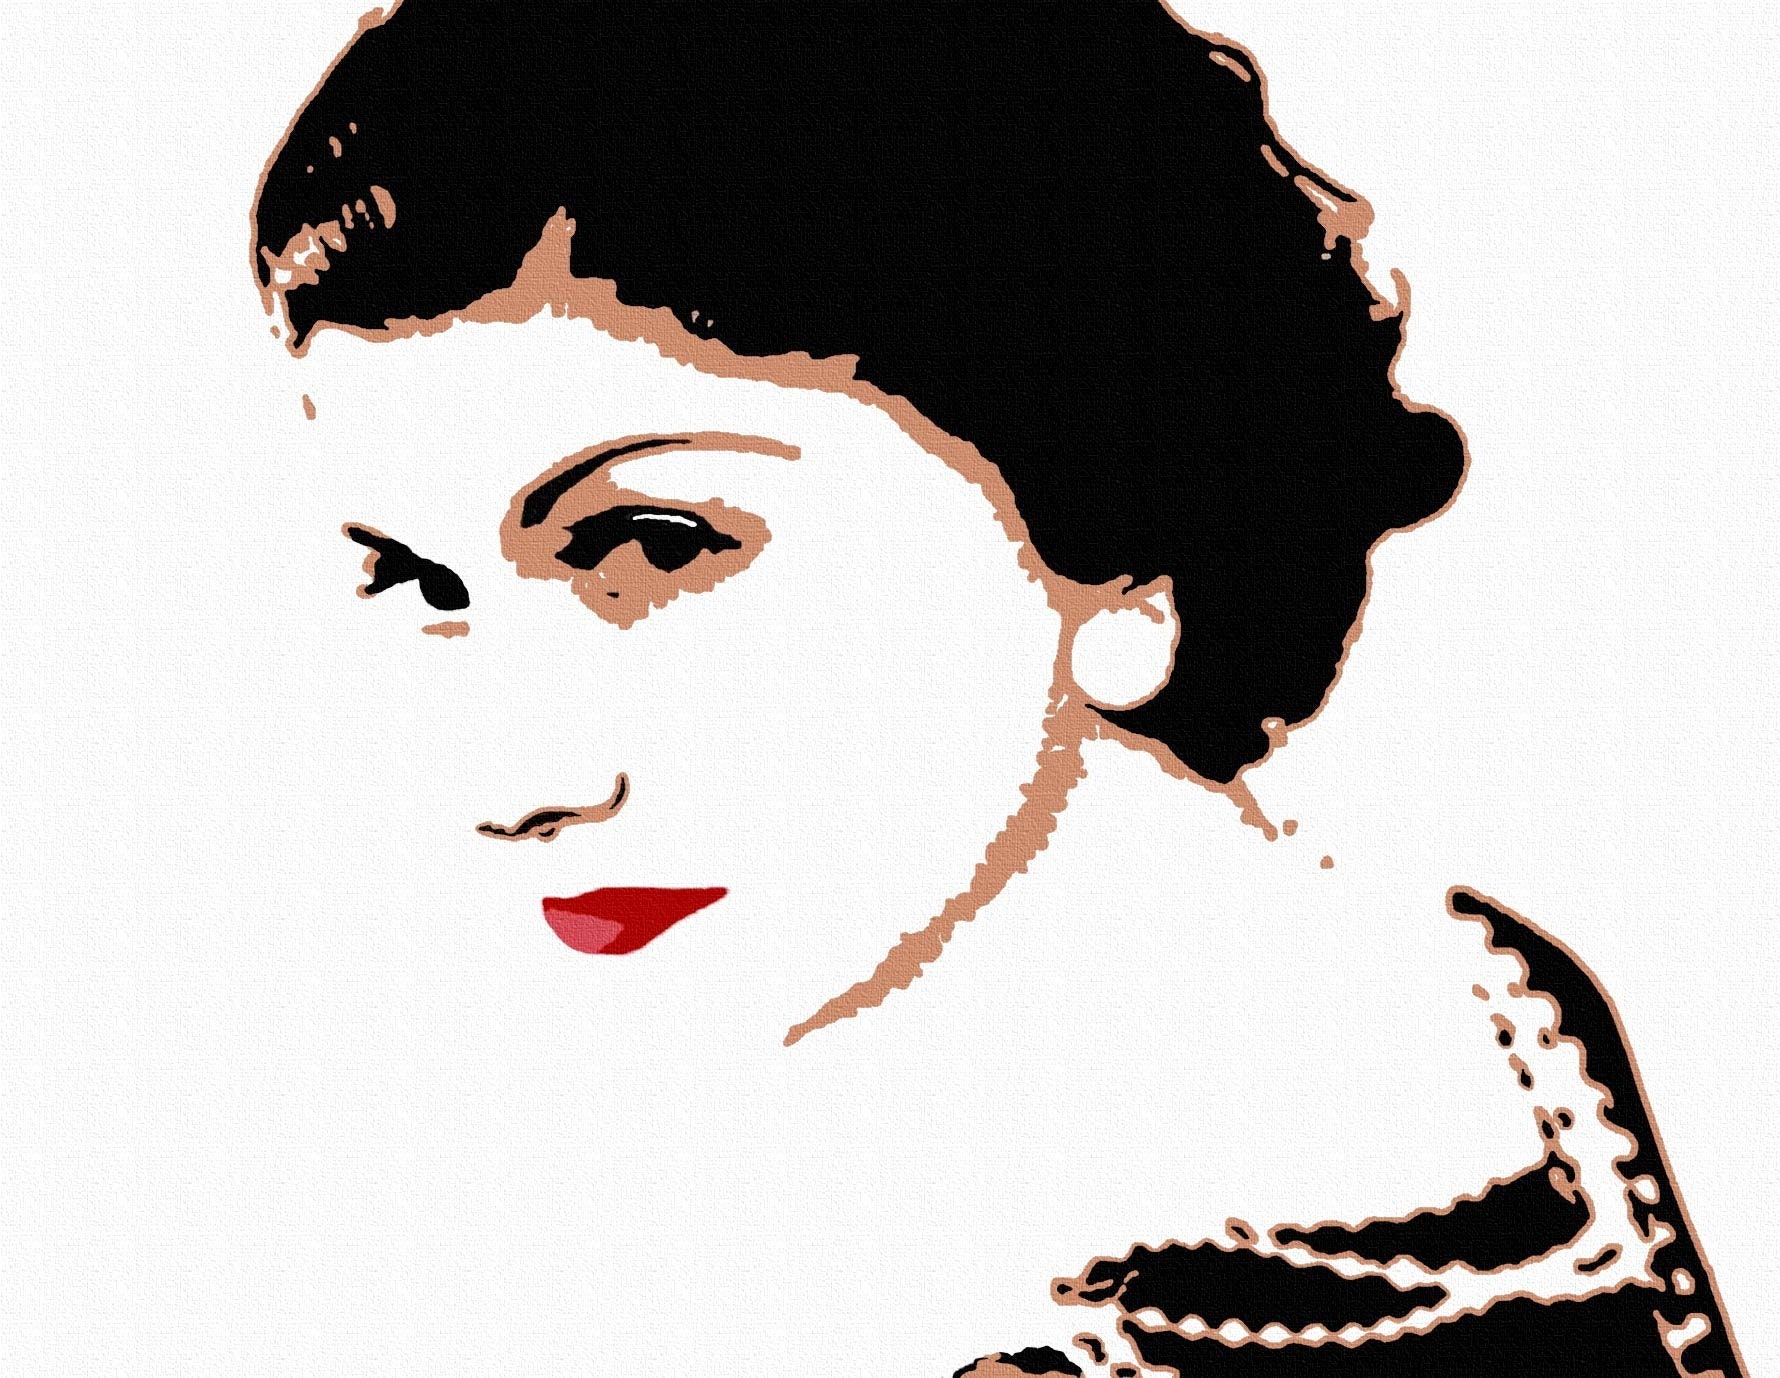 GNODpop Canvas Prints - Coco Chanel in White ( People > celebrities > Models & Fashion Icons > Coco Chanel art) - 26x18 in